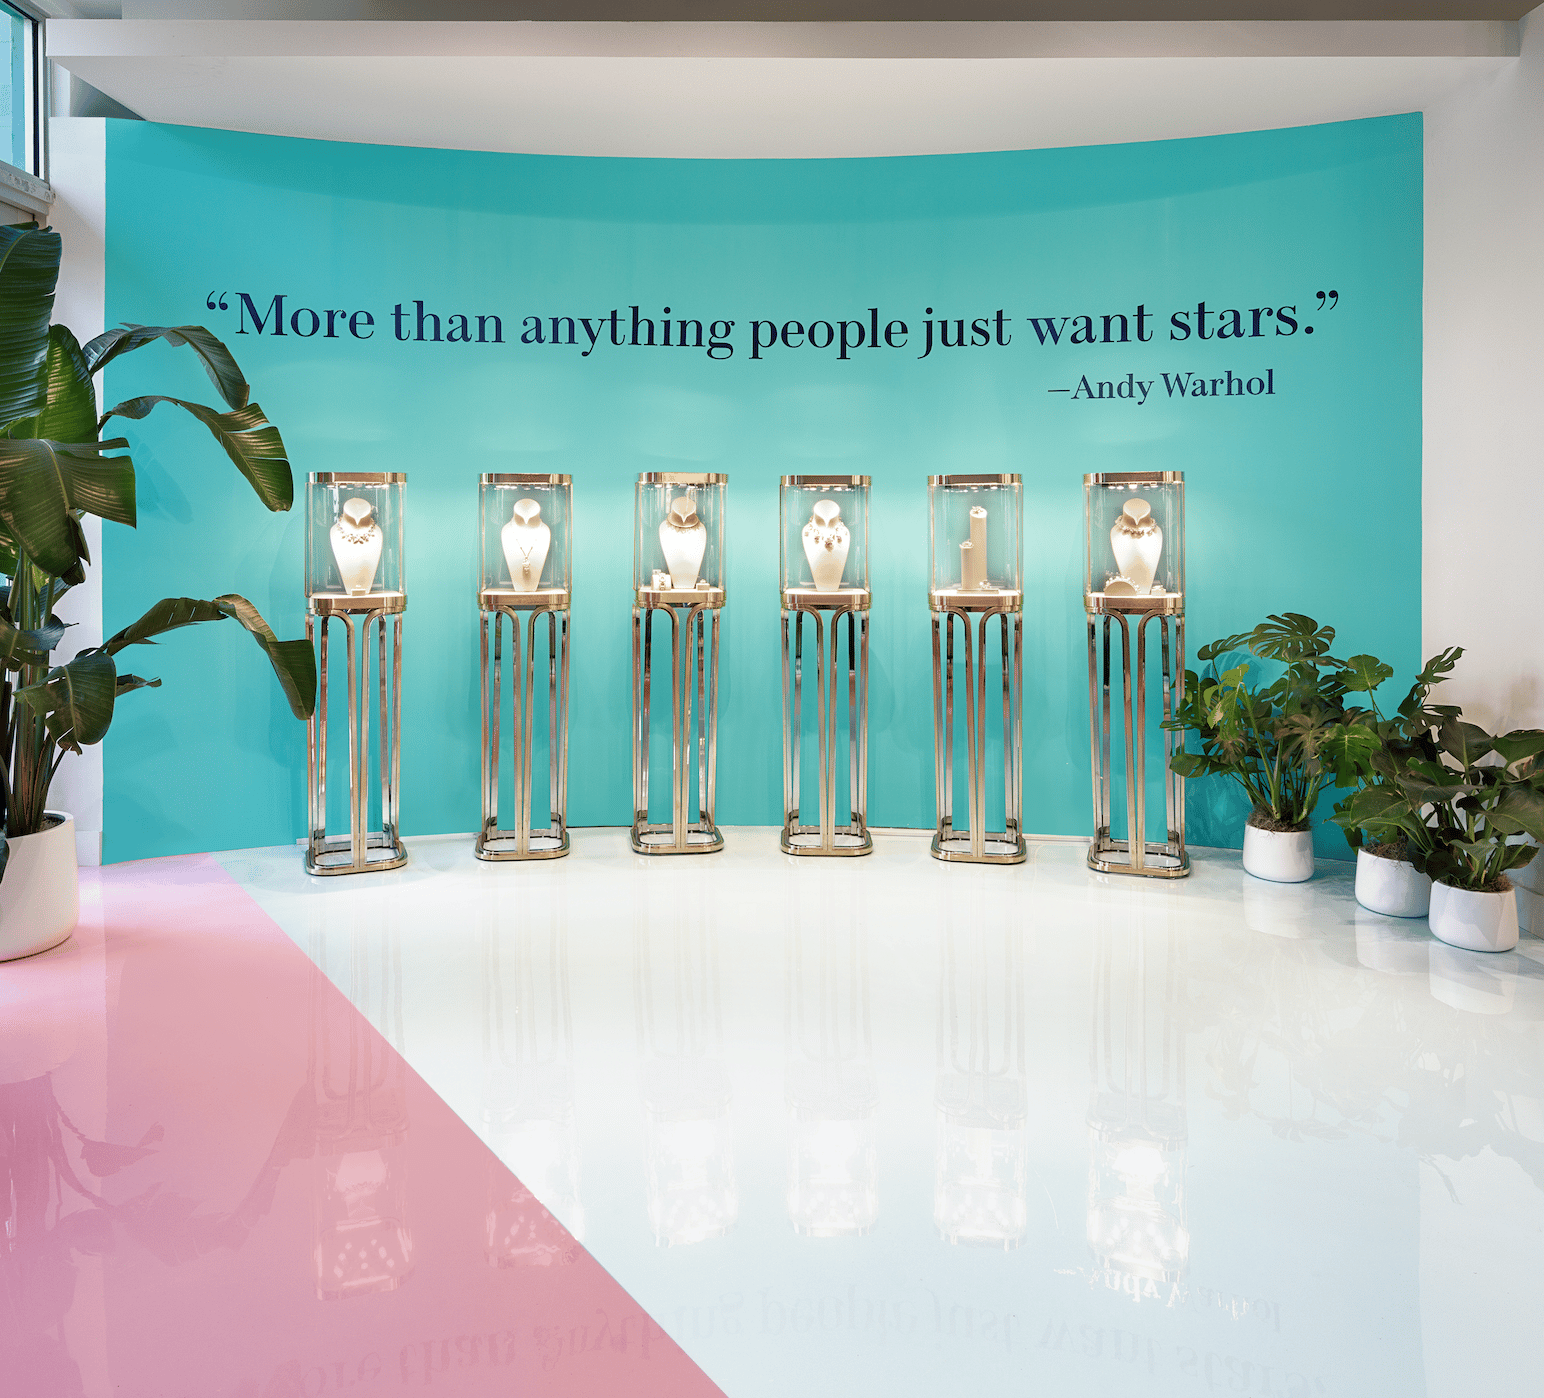 Andy Warhol quote on blue wall with jewelry stands behind glass